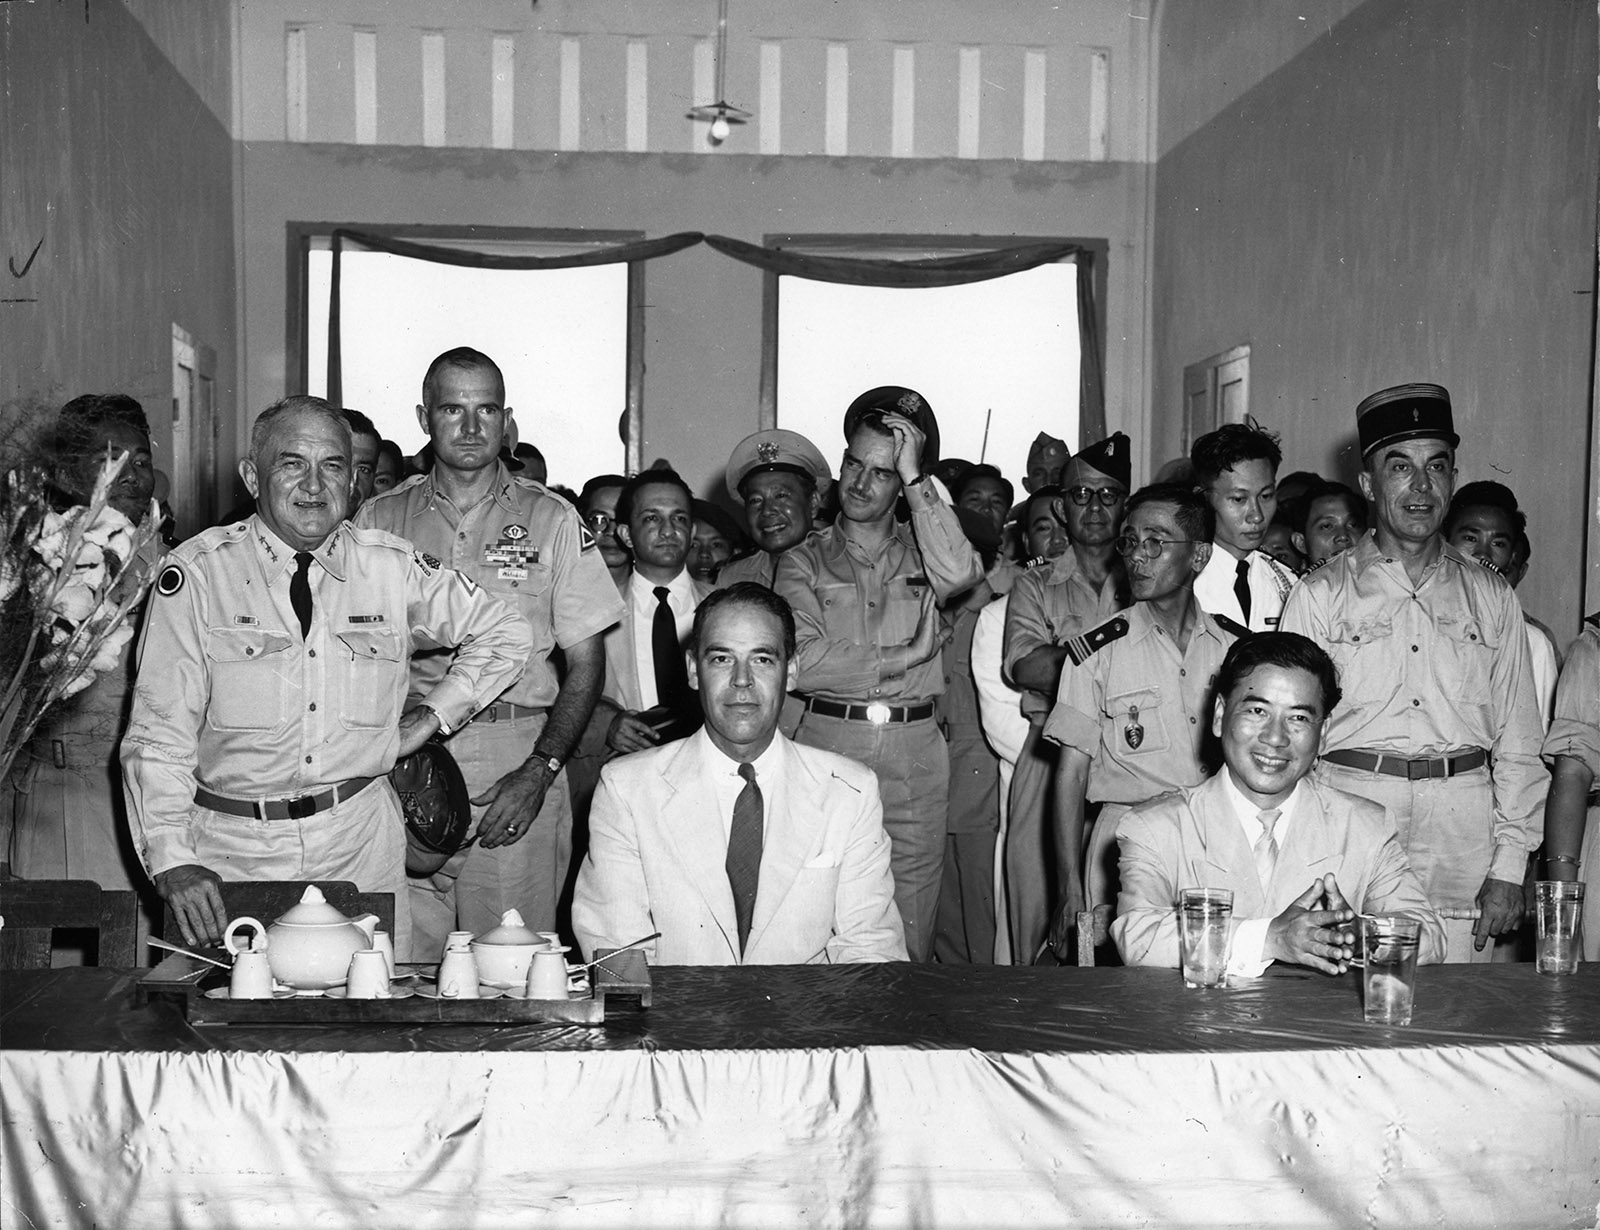 Edward Lansdale (second row, hand on hat) standing behind Lieutenant General John W. ‘Iron Mike’ O’Daniel, commander of the US Military Assistance Advisory Group (left), Ambassador G. Frederick Reinhardt (center), and Ngo Dinh Diem (right), Saigon, 1955